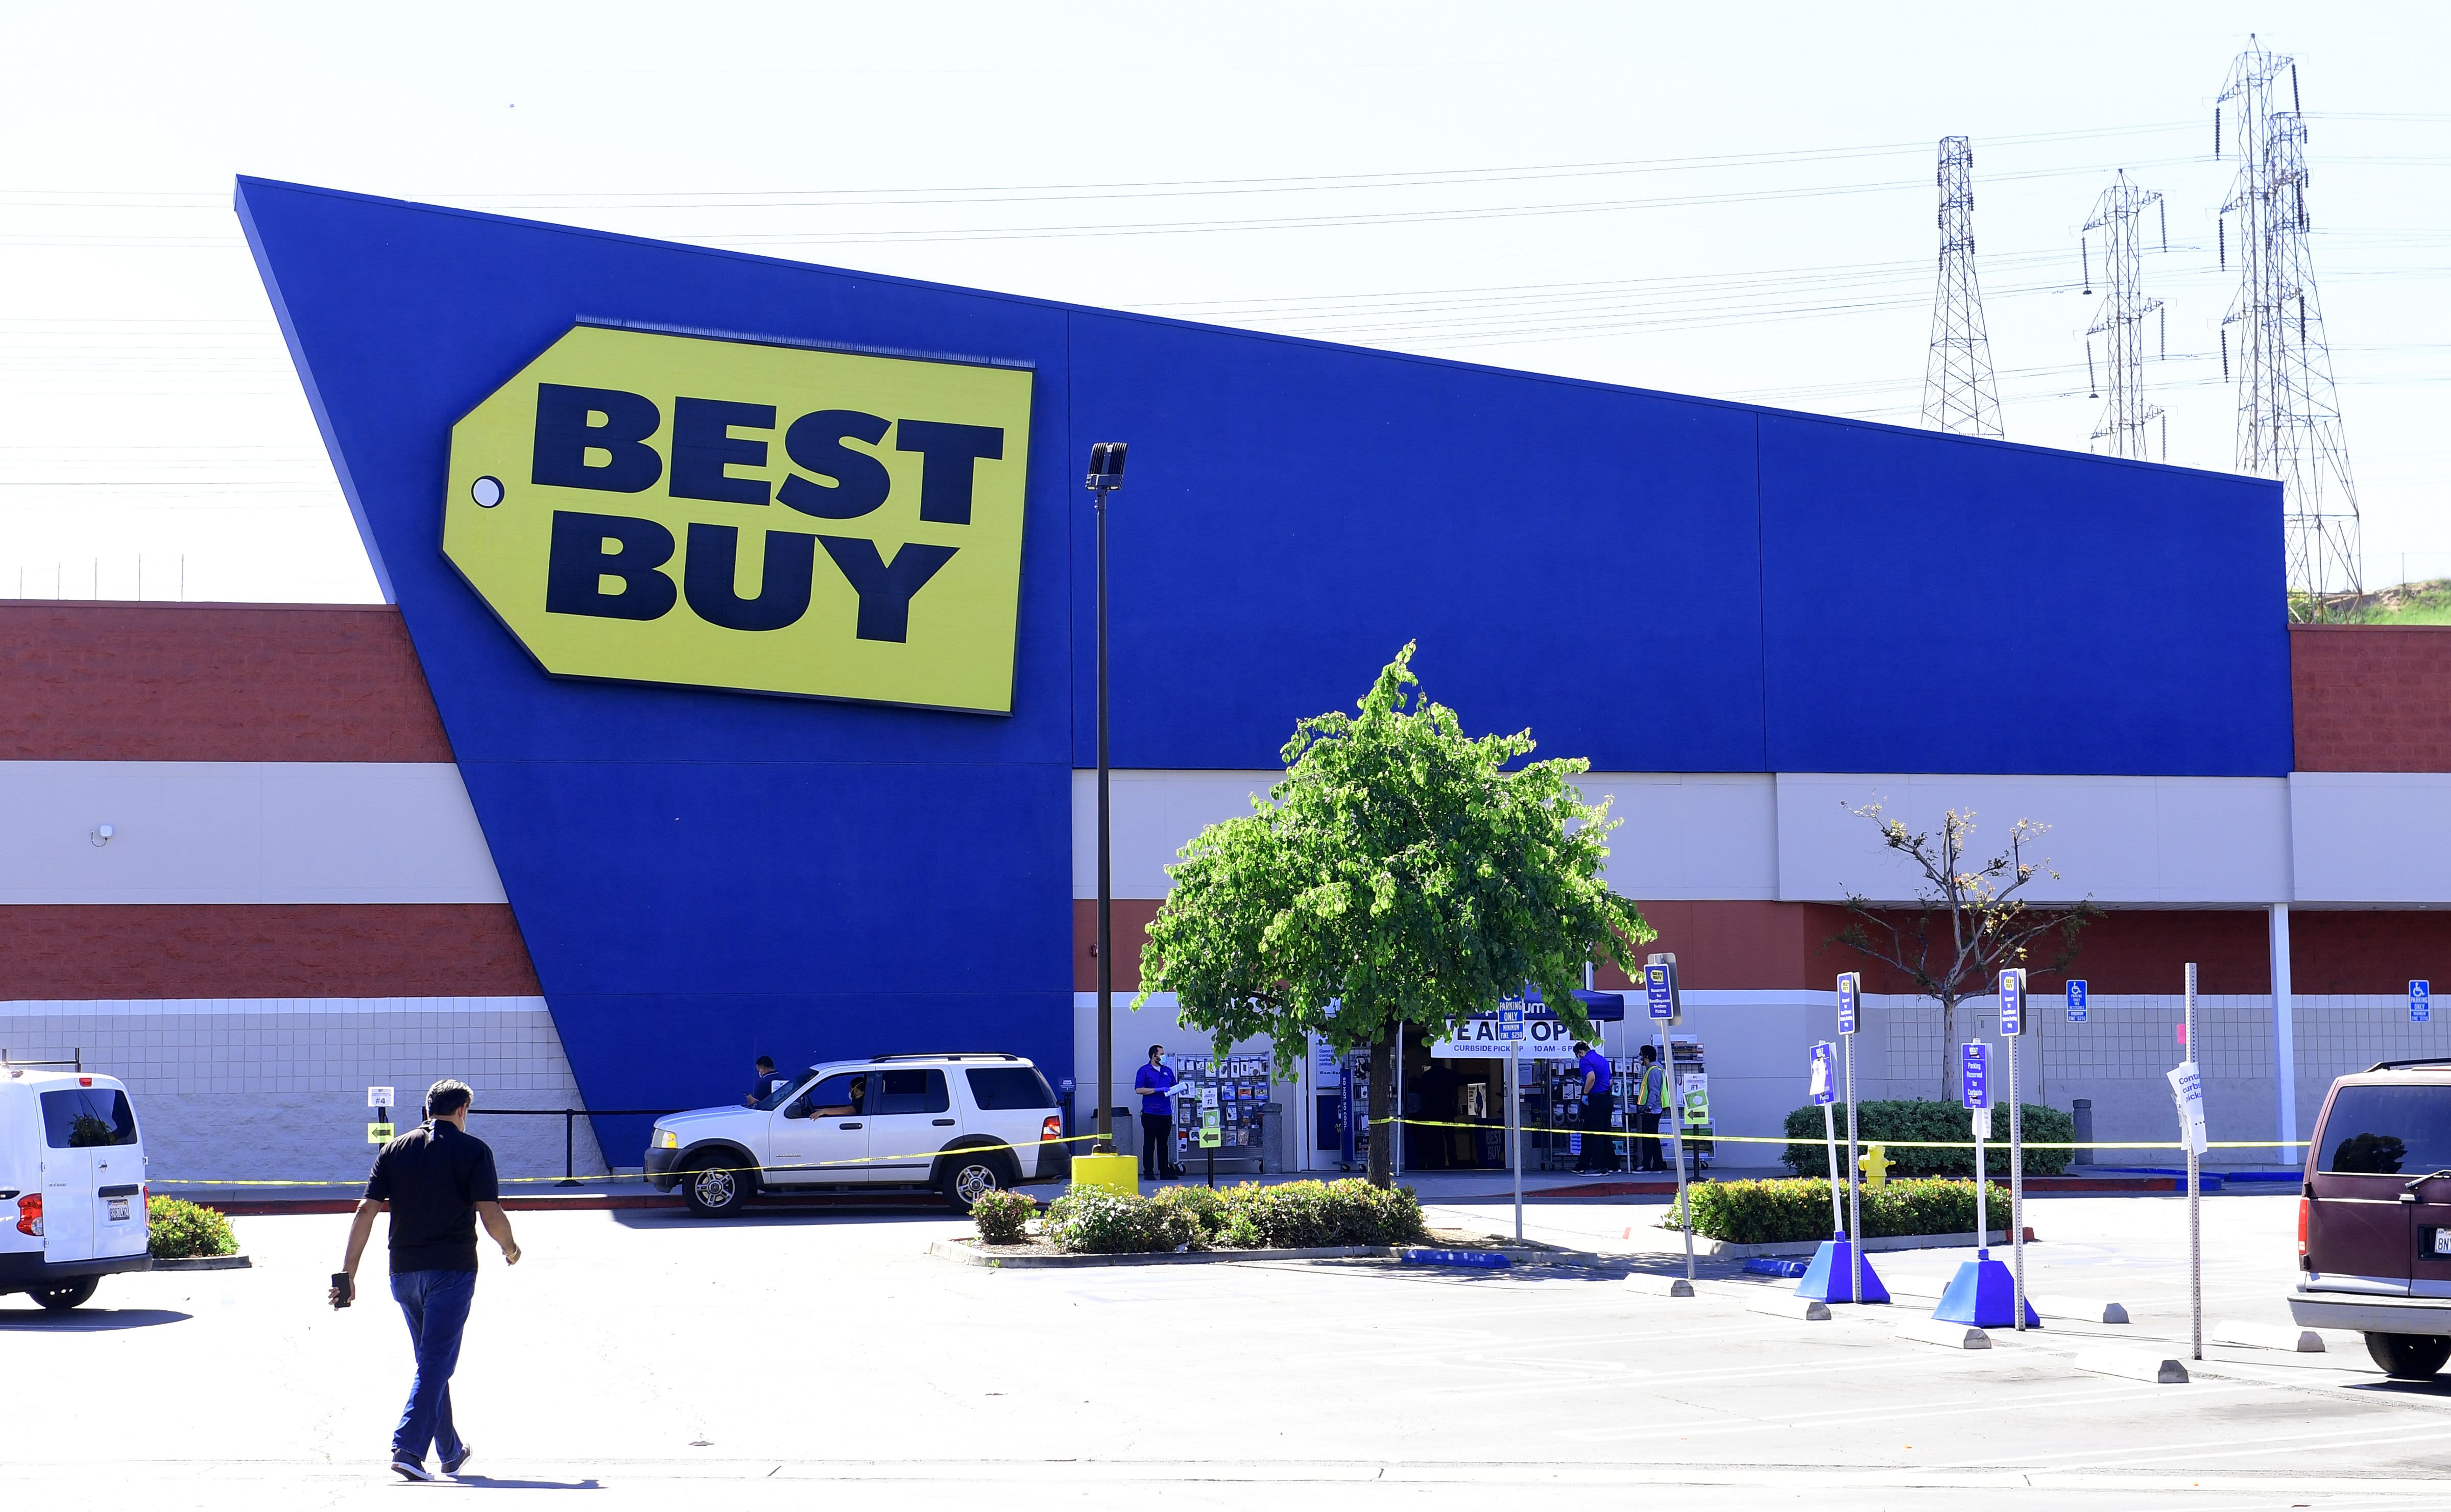 Best Buy CEO says the trauma from rising retail thefts could force employees to quit